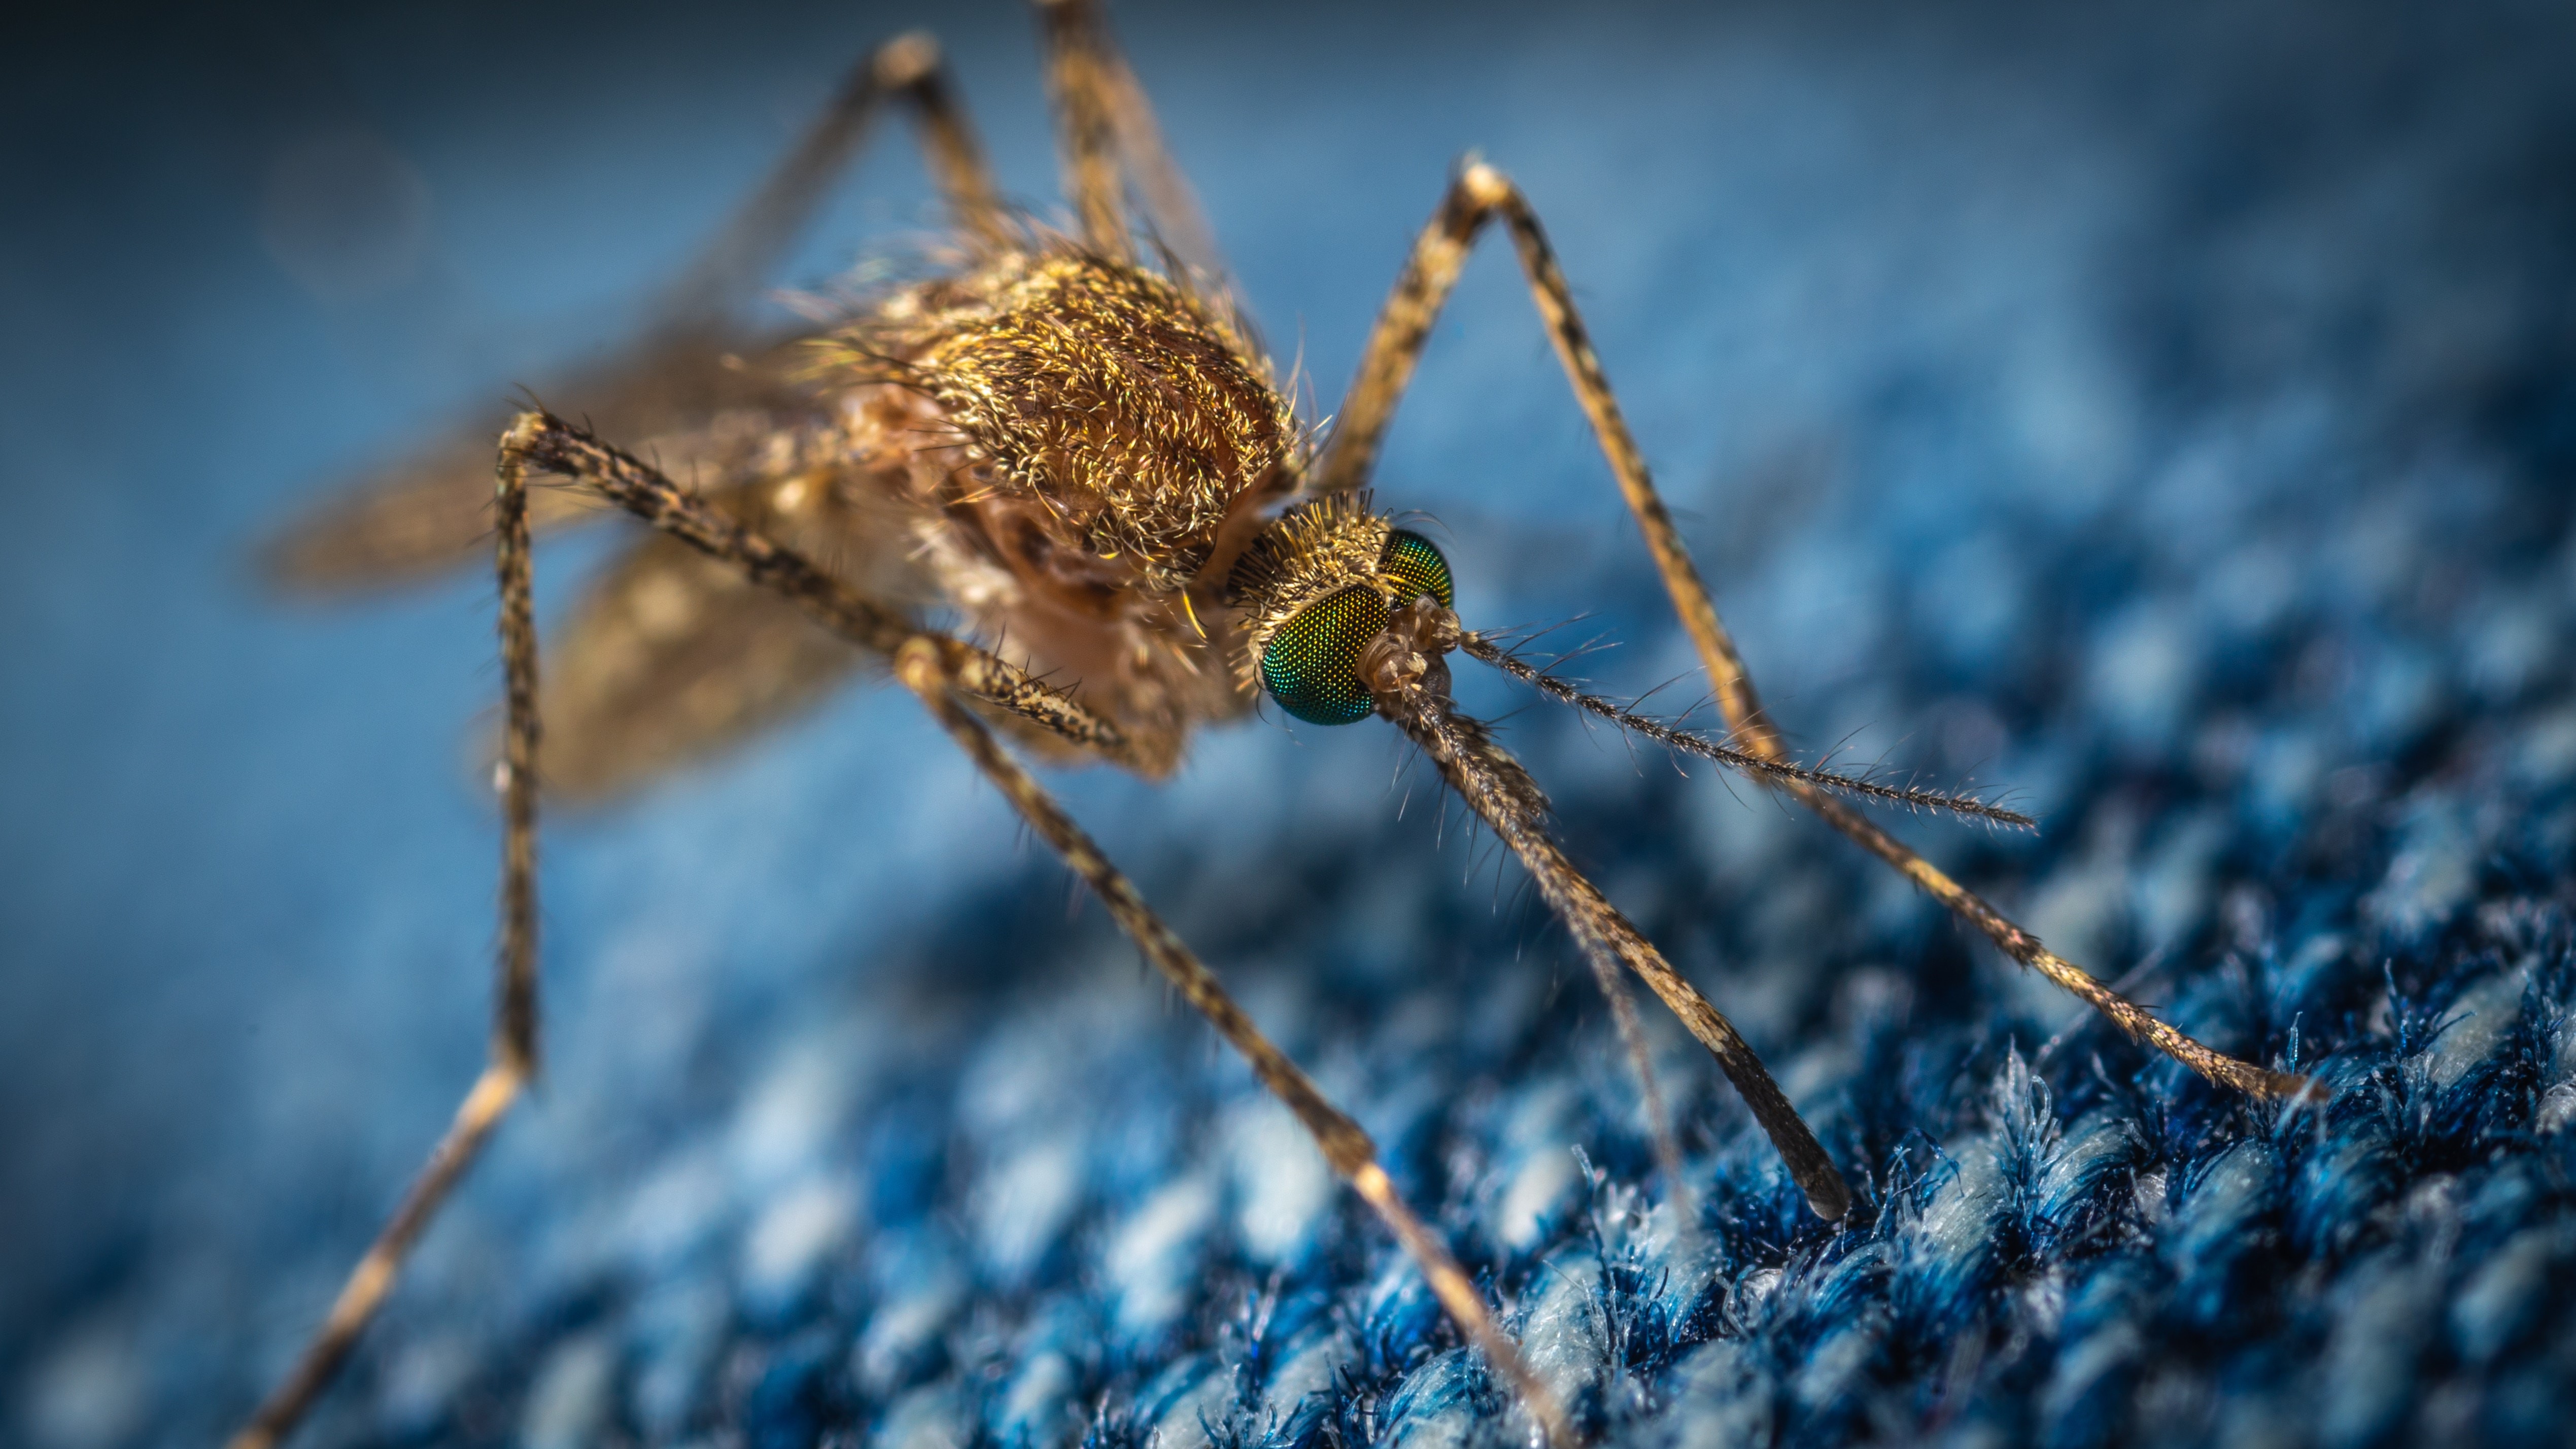 A brown mosquito sitting on a blue cloth